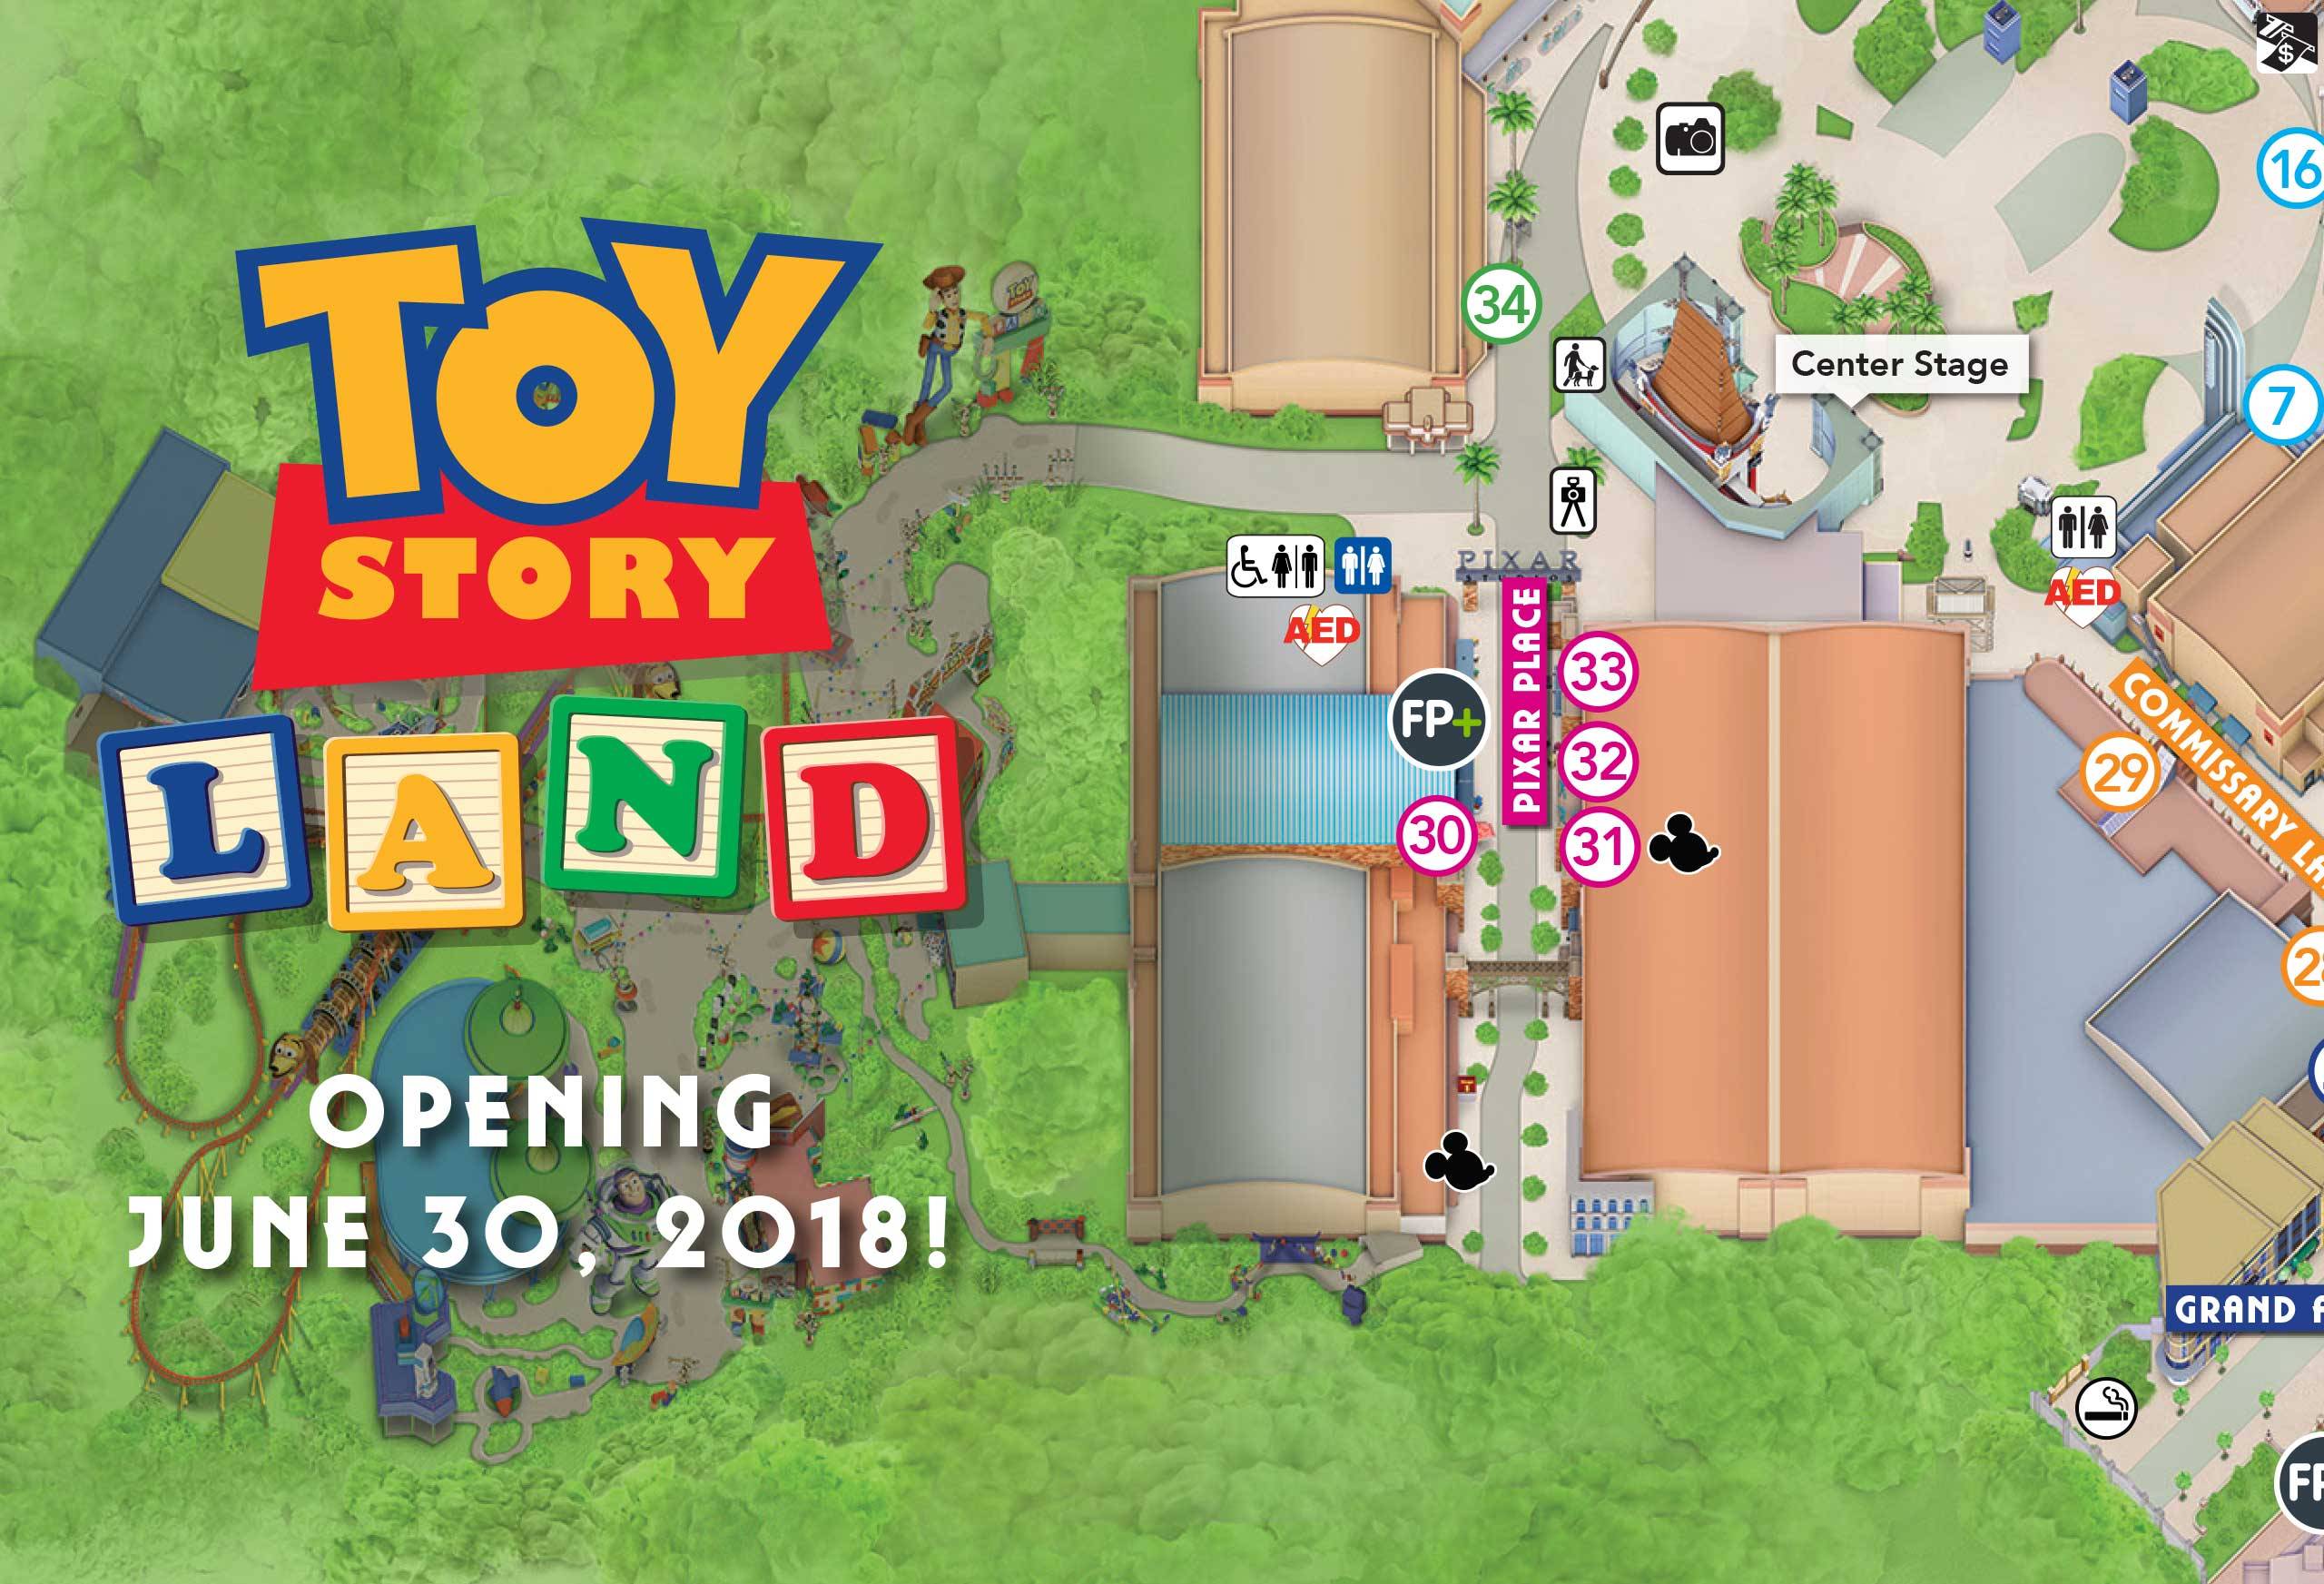 PHOTO - New guide map for Disney's Hollywood Studios shows Toy Story Land